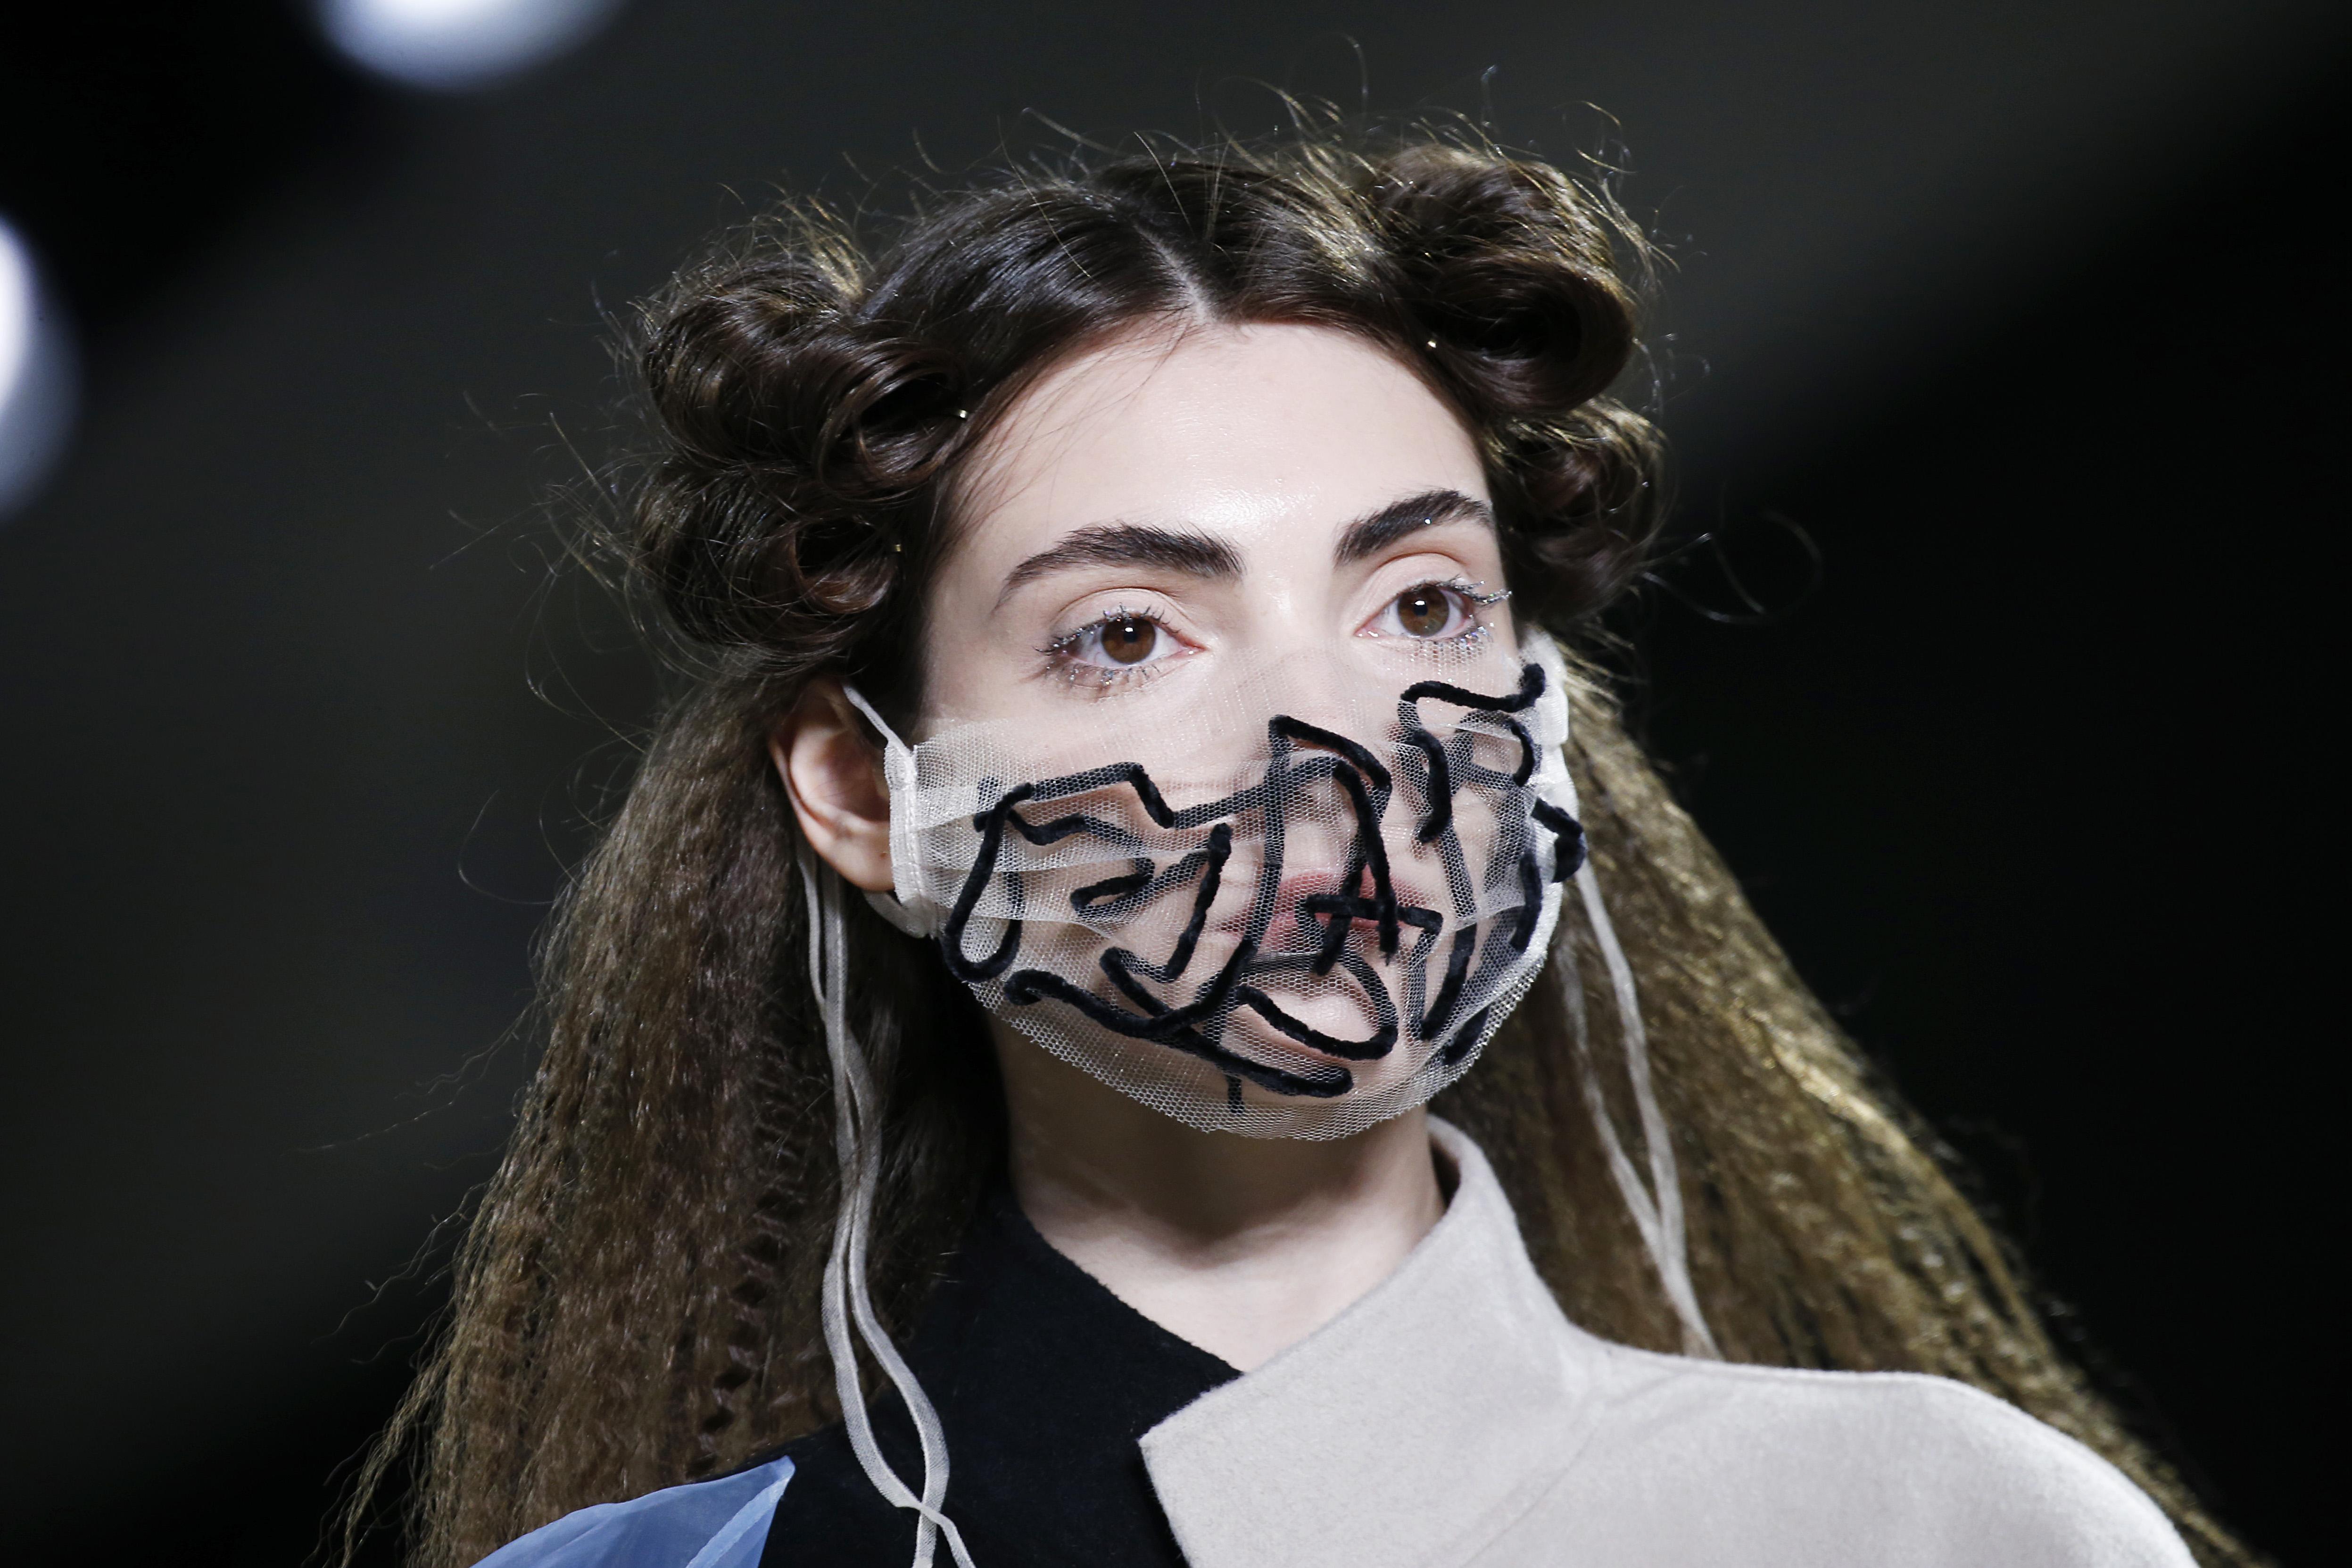 A model with crimped hair and a face mask made of white mesh.